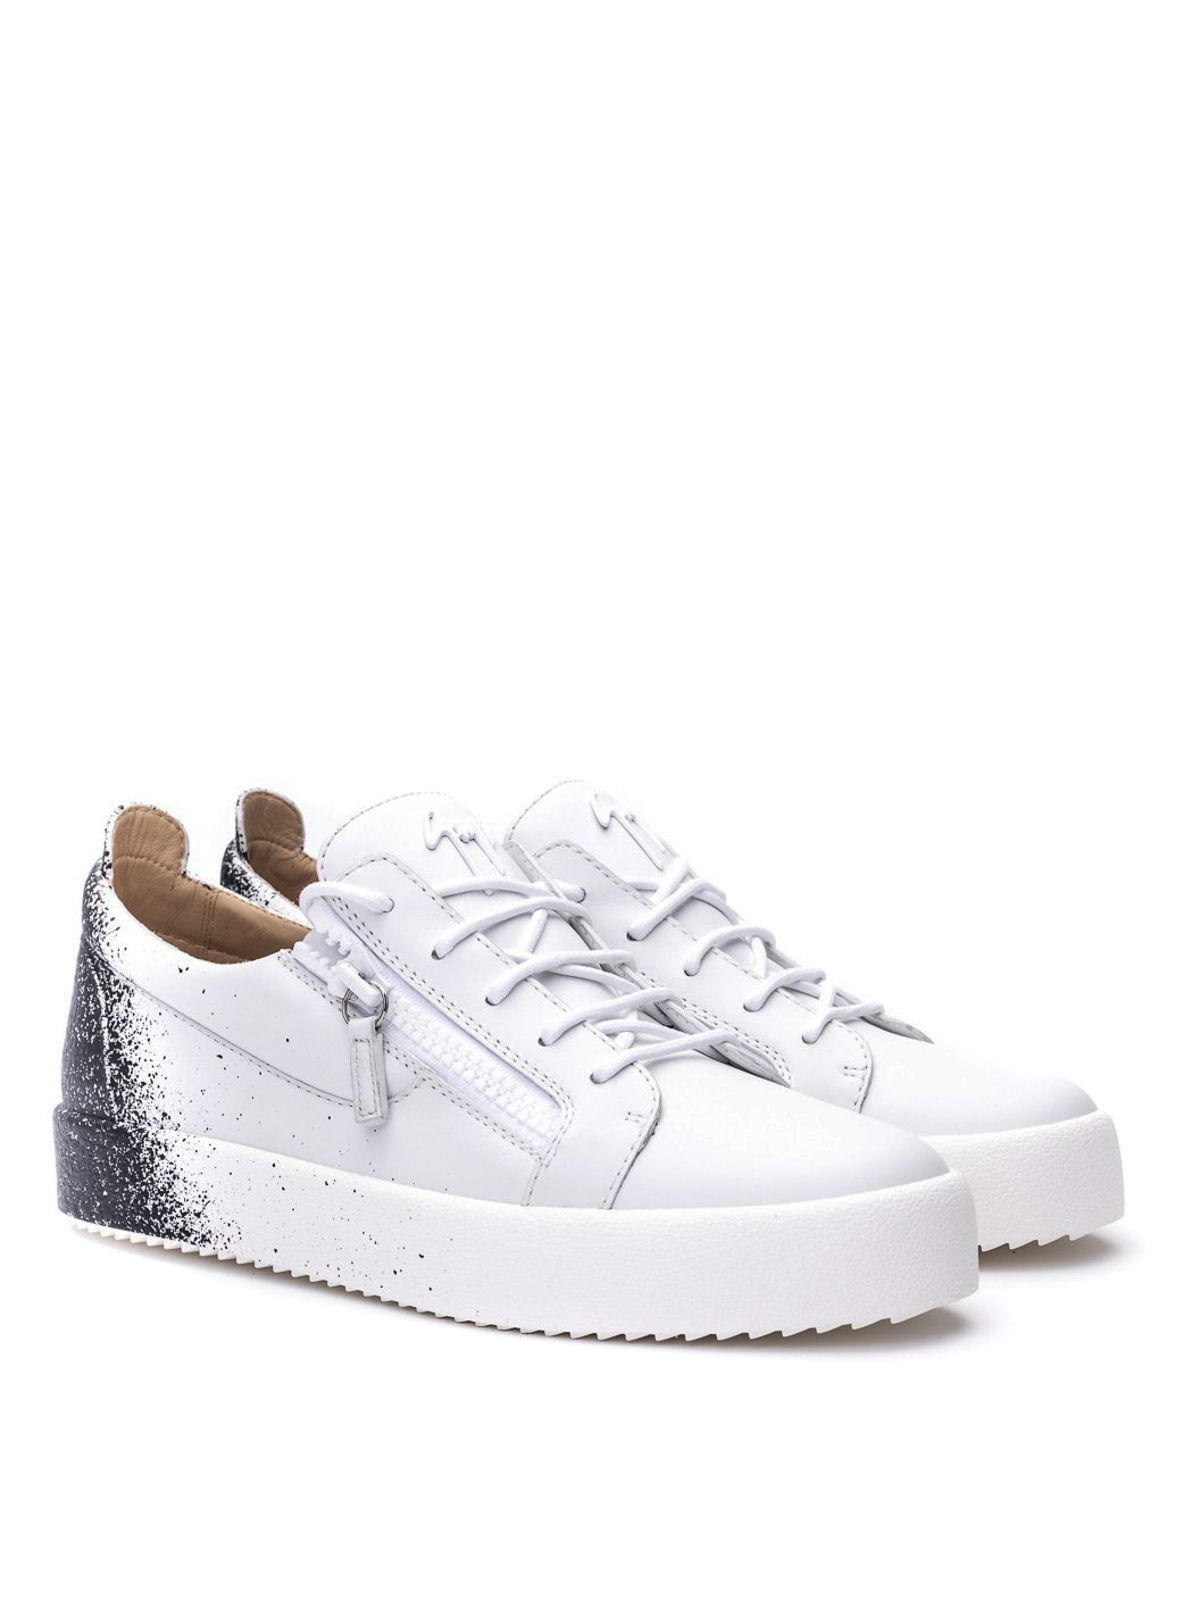 Trainers Giuseppe Zanotti - Frankie leather low top sneakers 